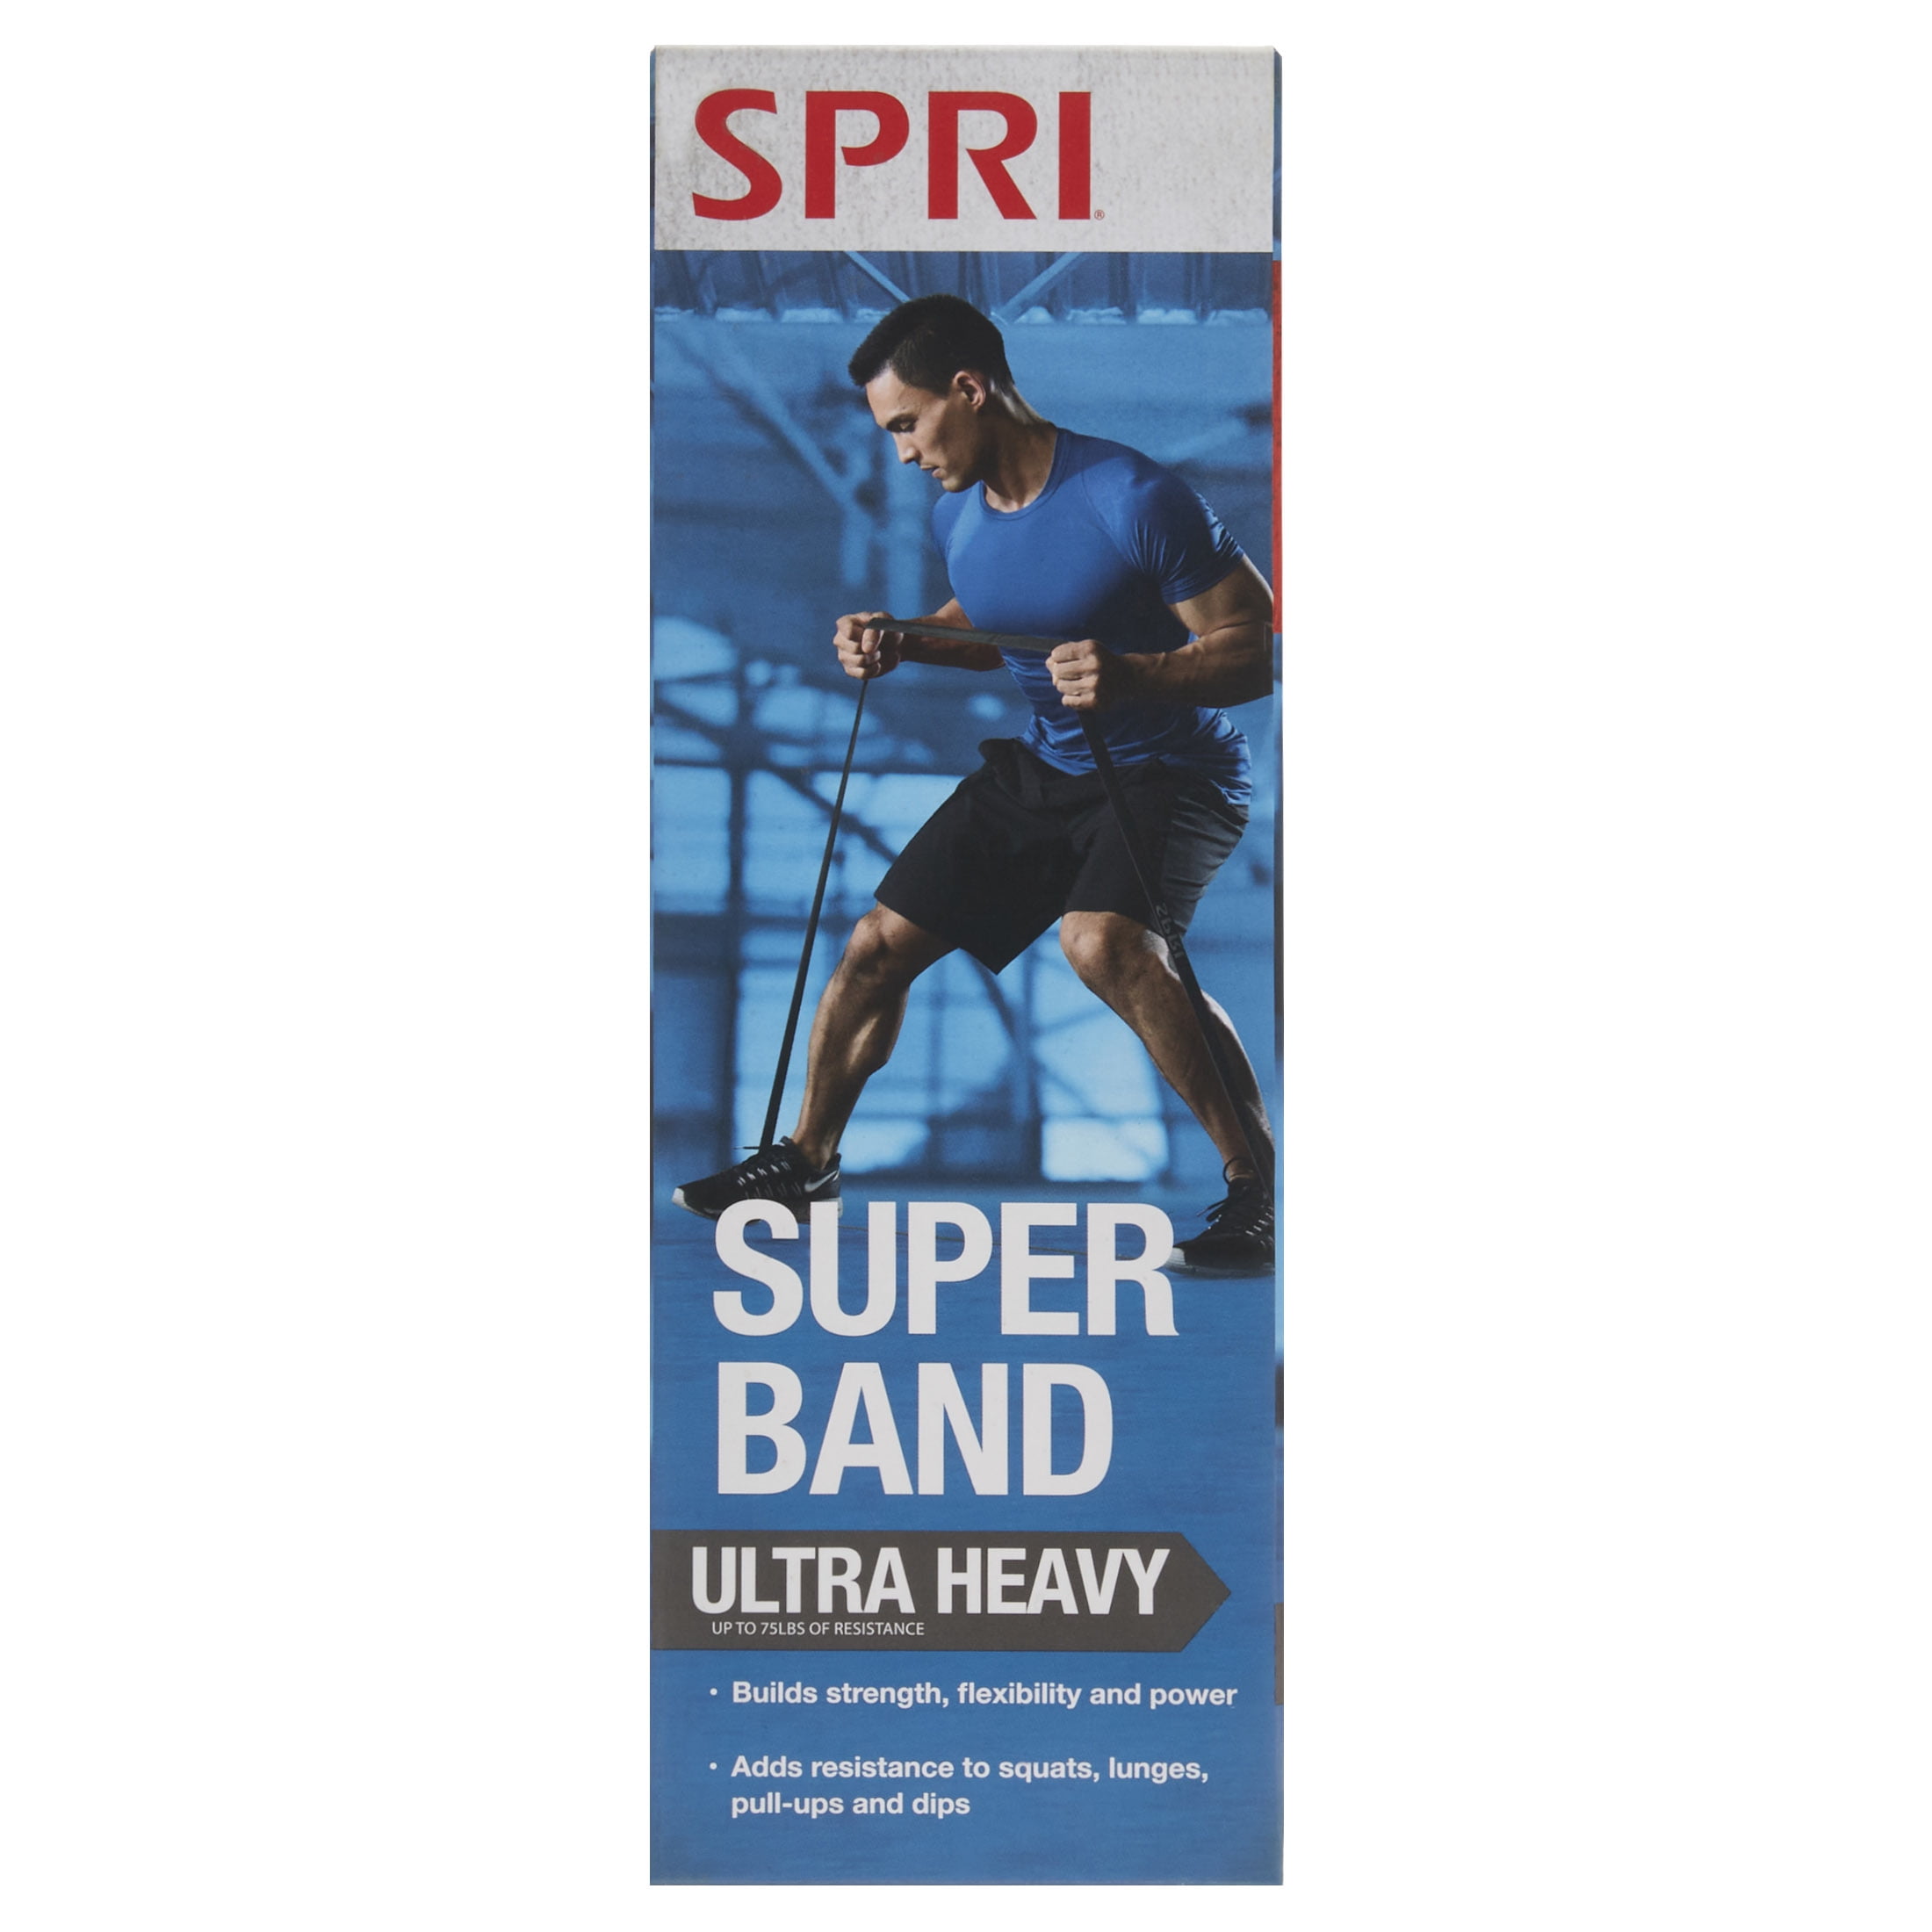 1-3/4" SPRI Superband Ultra-Heavy Resistance Exercise Band (Black) $3.50 + Free Shipping w/ Walmart+ or on $35+